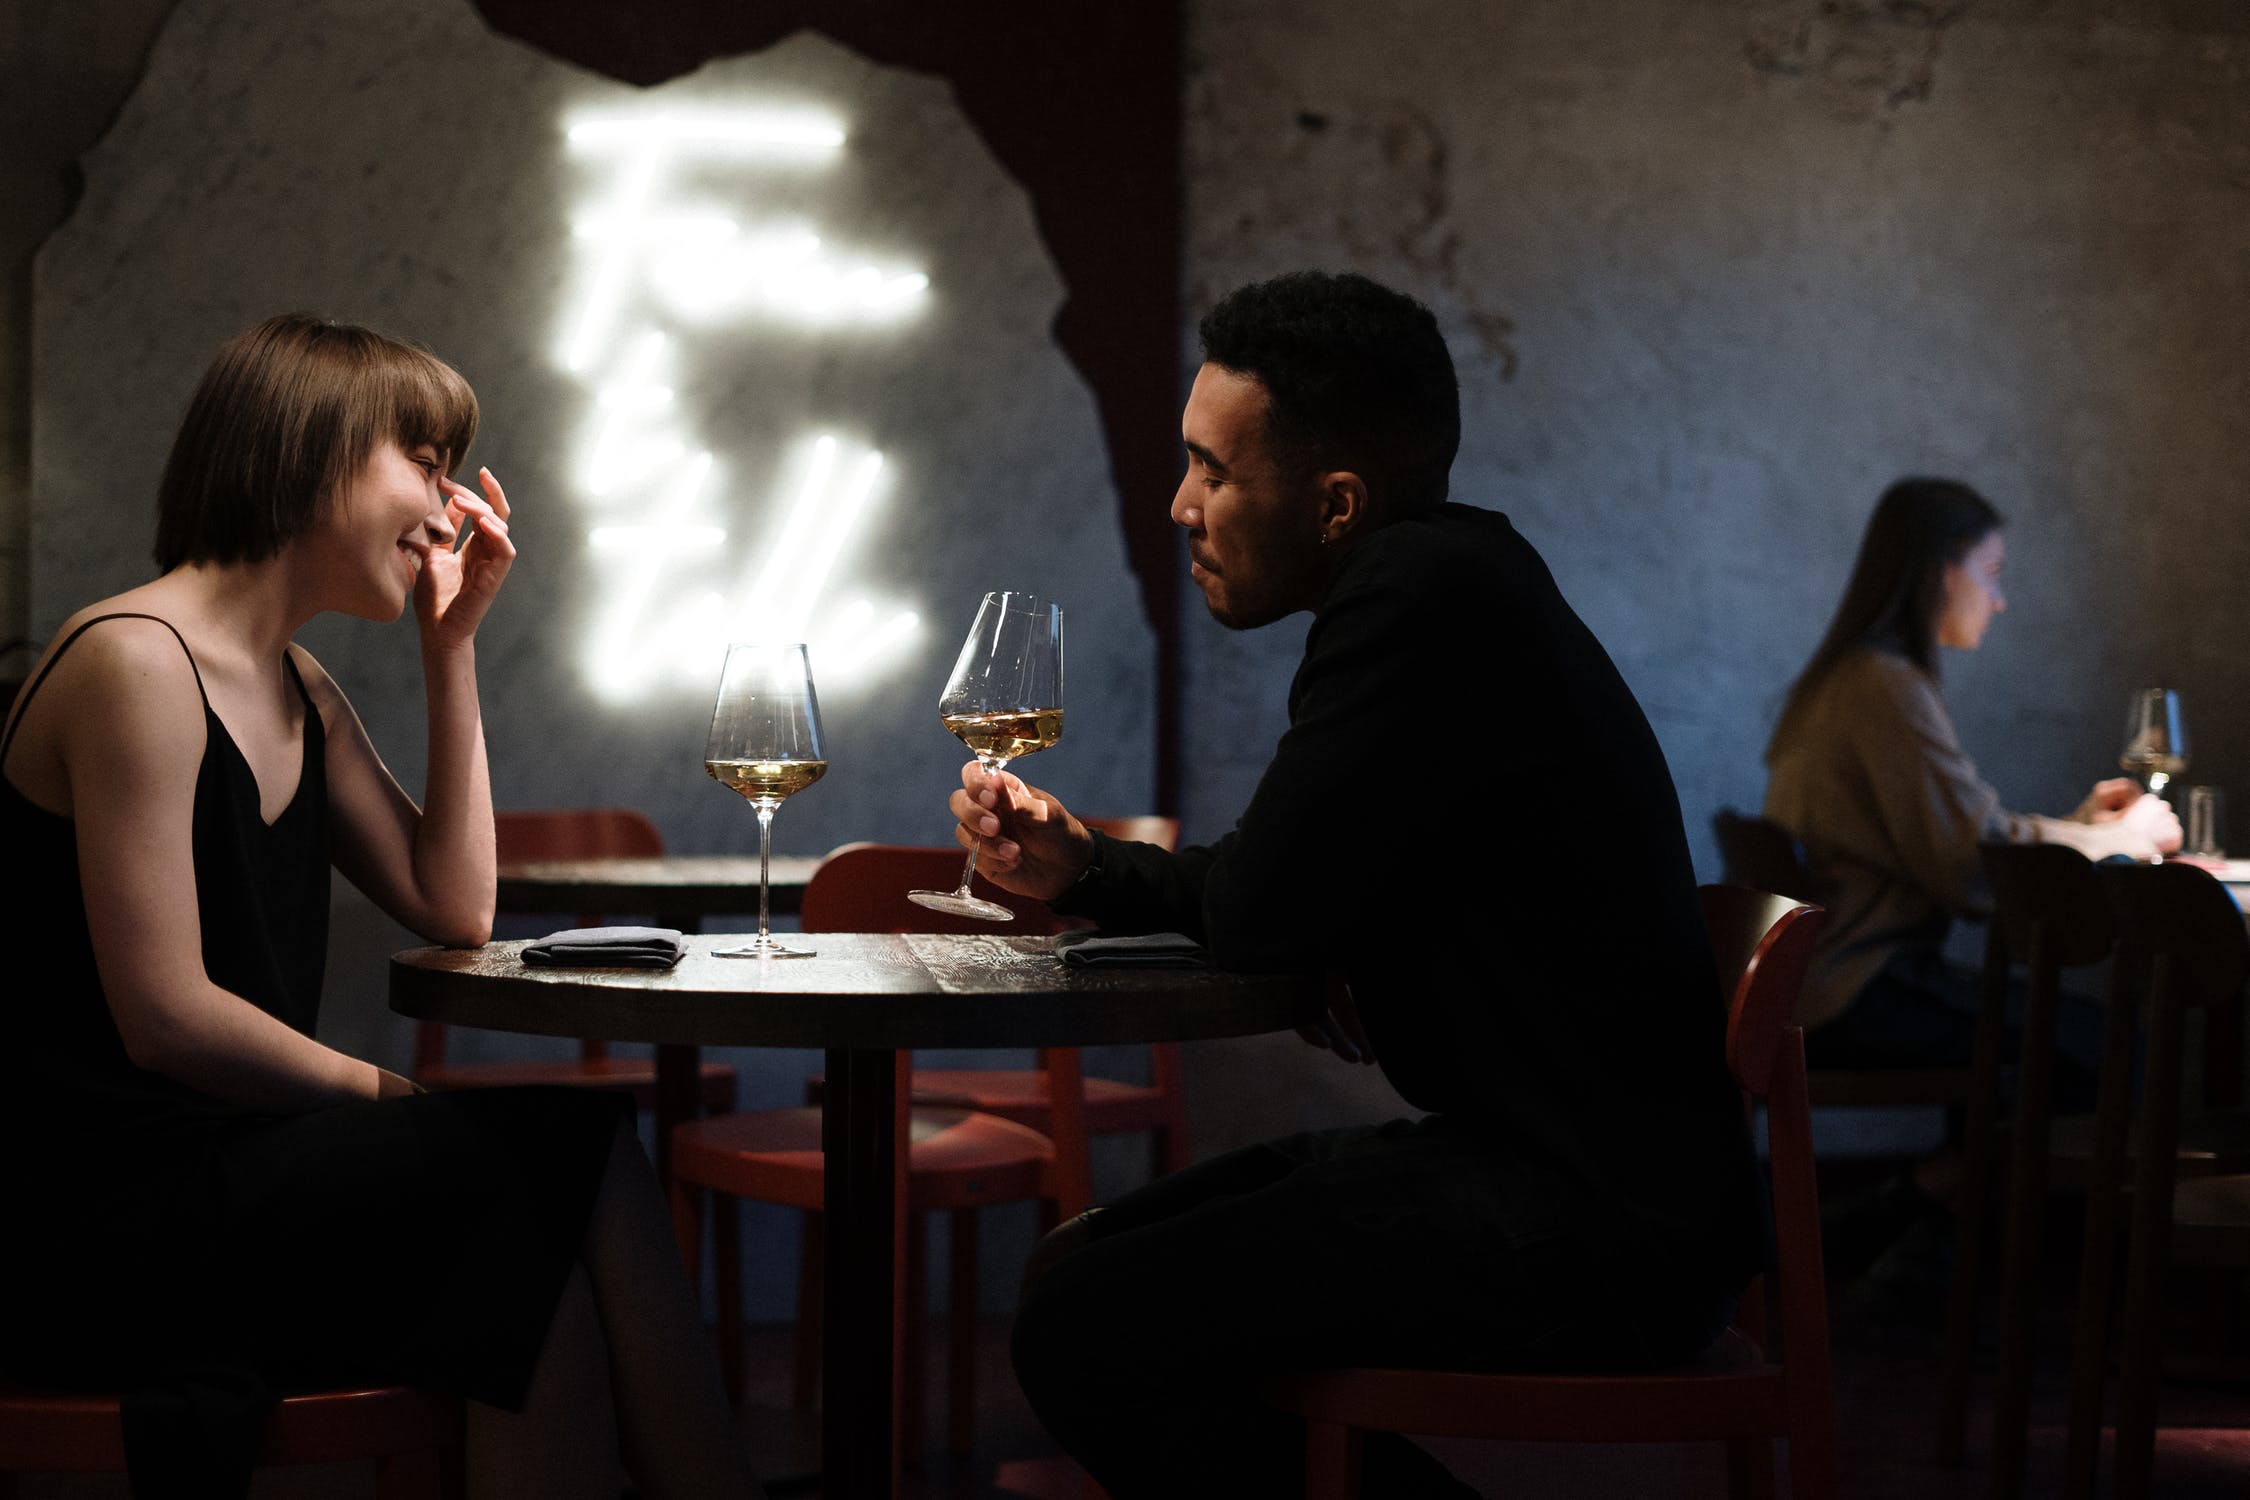 Couple in a bar | Source: Pexels